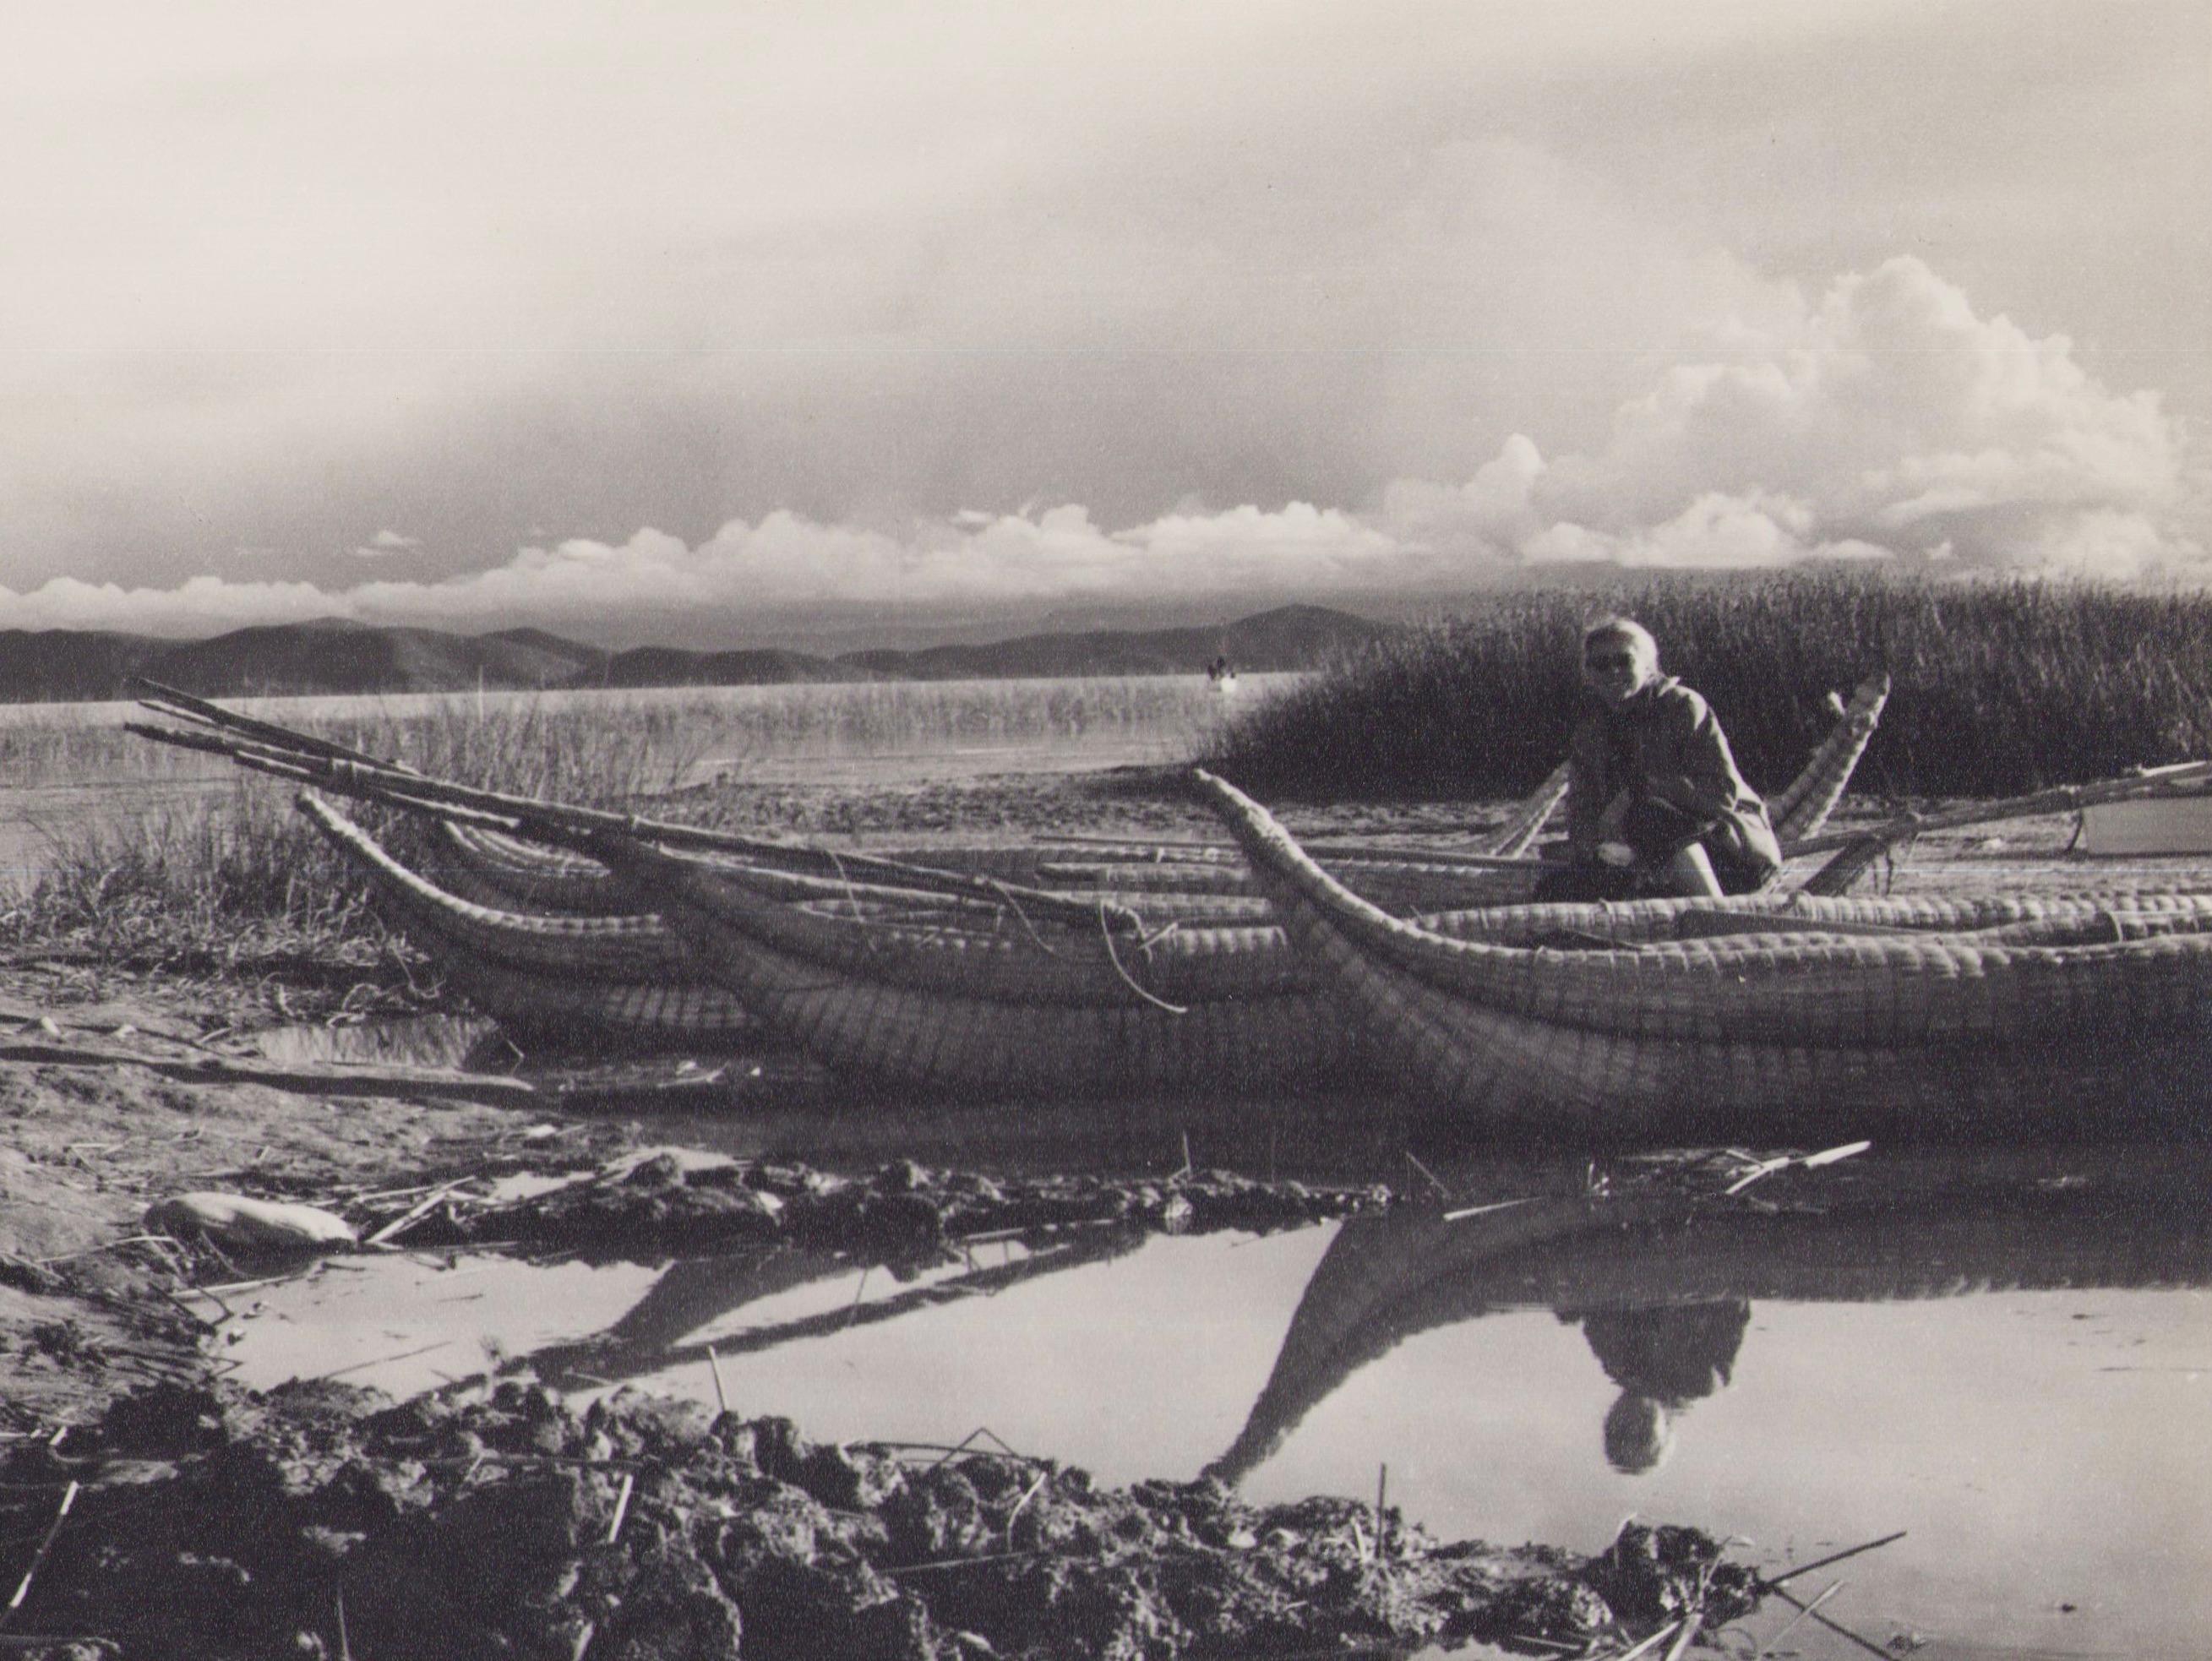 Bolivia, Boats, Black and White Photography, 1960s, 17, 3 x 23, 4 cm - Gray Portrait Photograph by Hanna Seidel